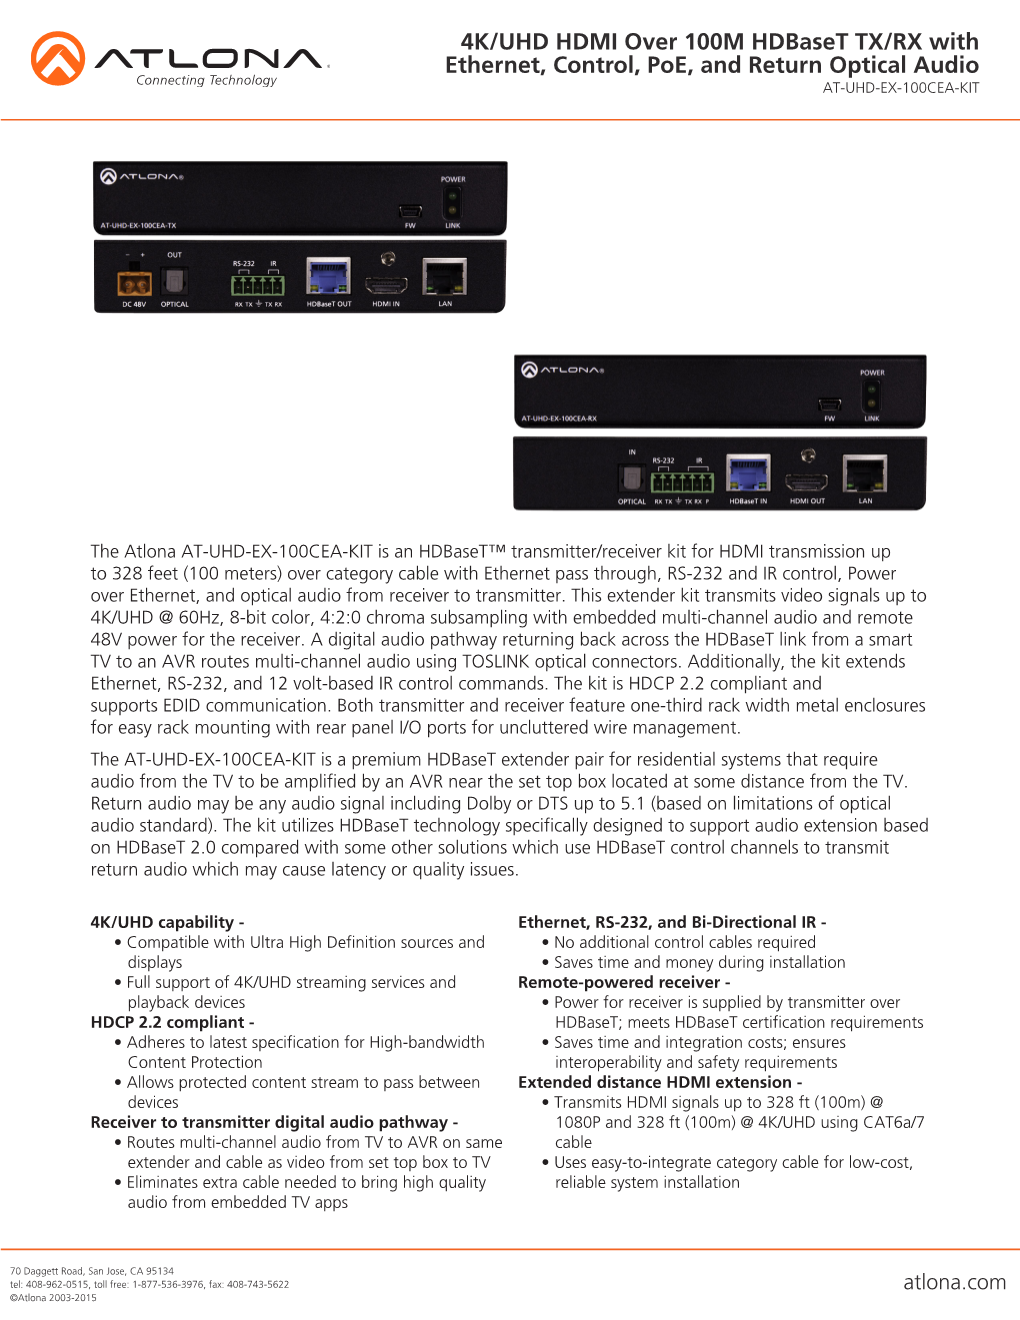 4K/UHD HDMI Over 100M Hdbaset TX/RX with Ethernet, Control, Poe, and Return Optical Audio AT-UHD-EX-100CEA-KIT